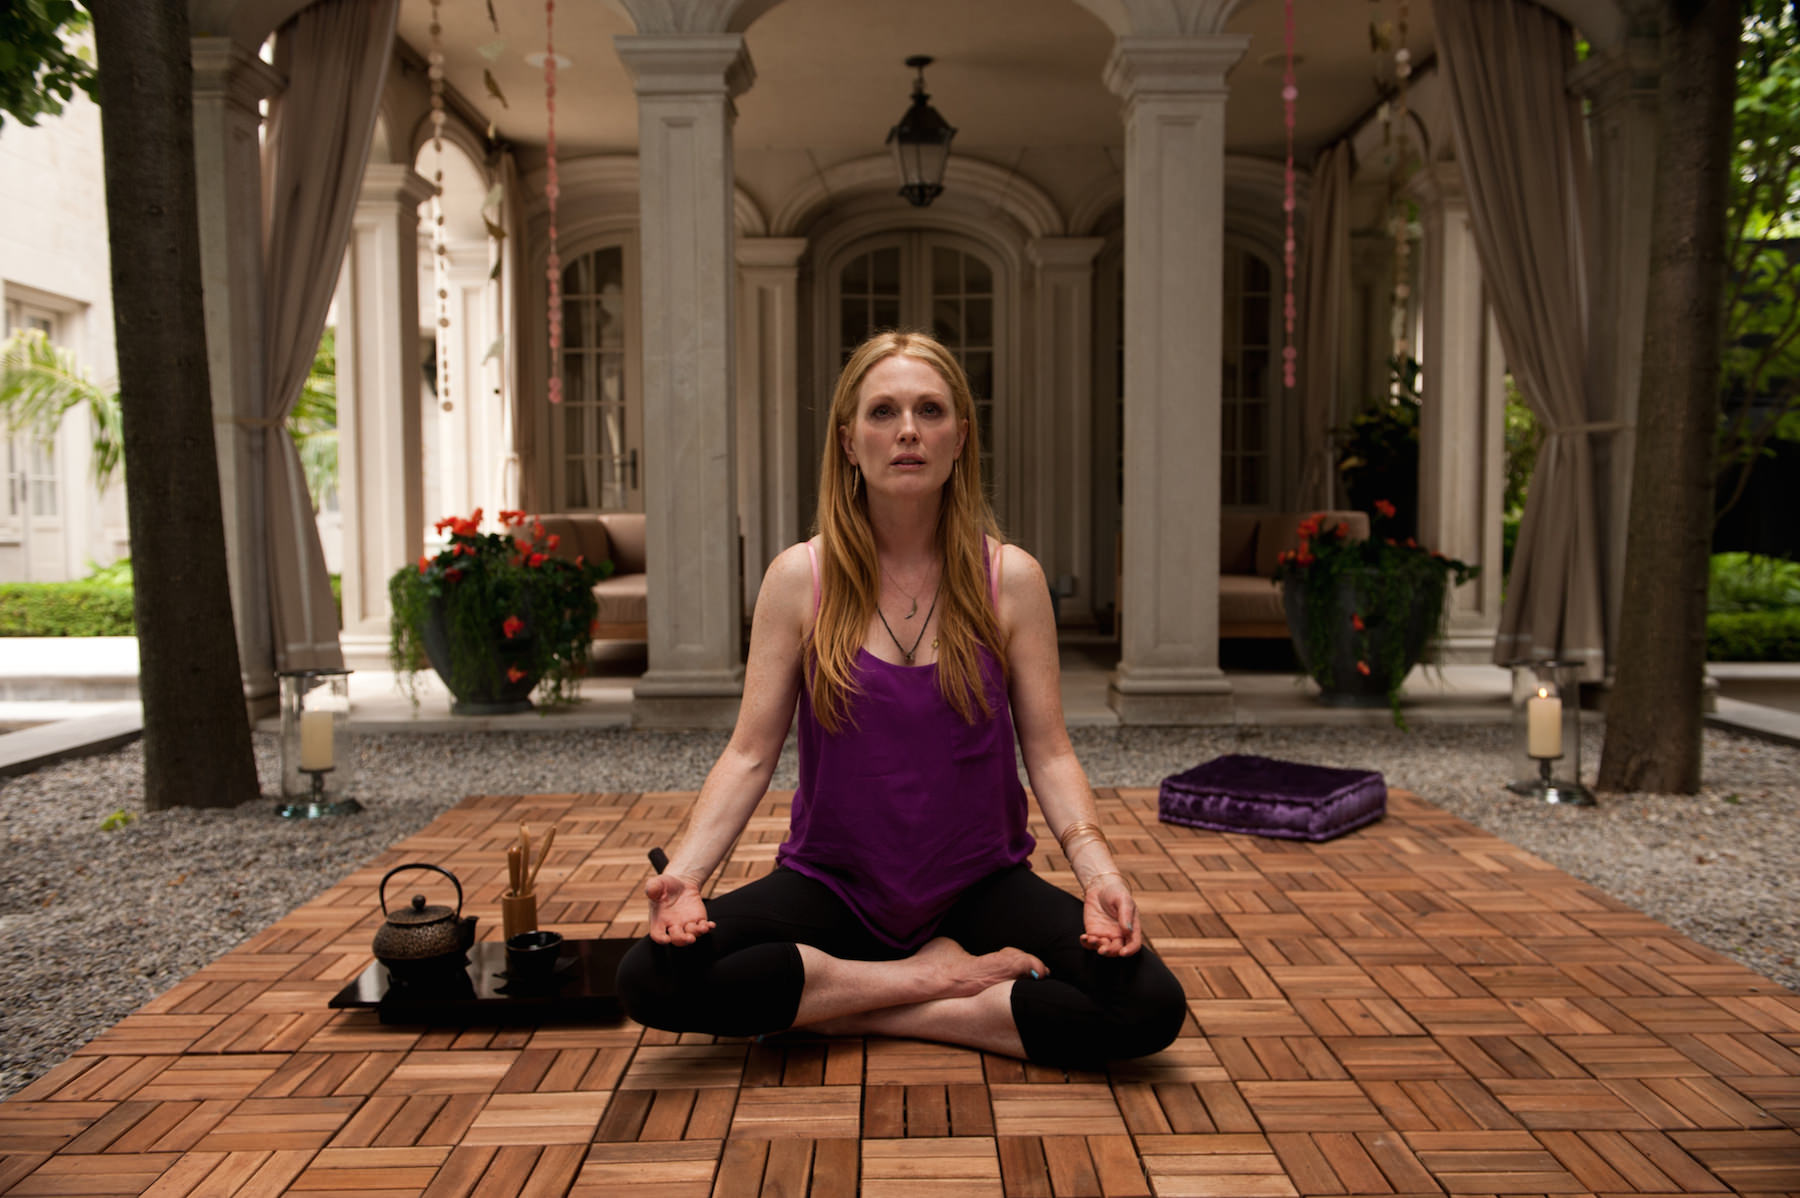 Maps to the stars julianne moore